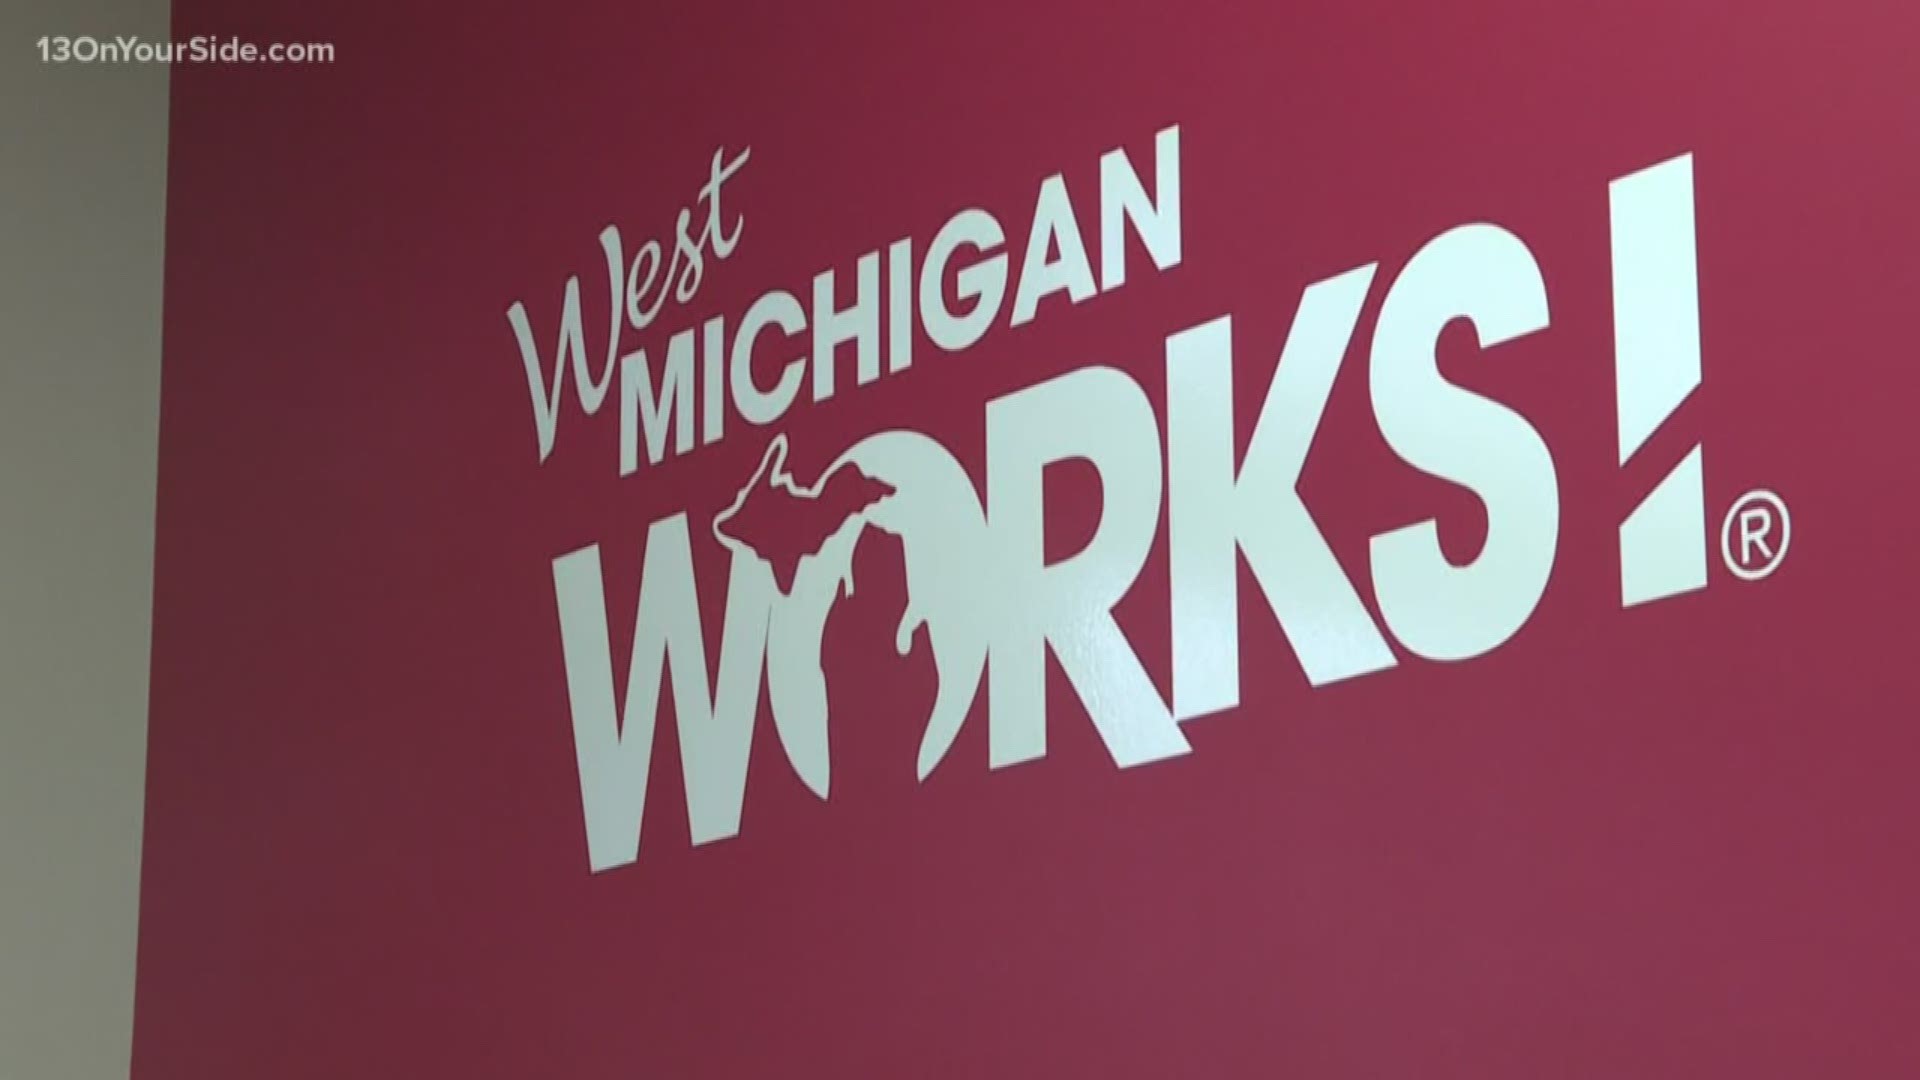 West Michigan Works is helping people to file for unemployment benefits and get people back to work.